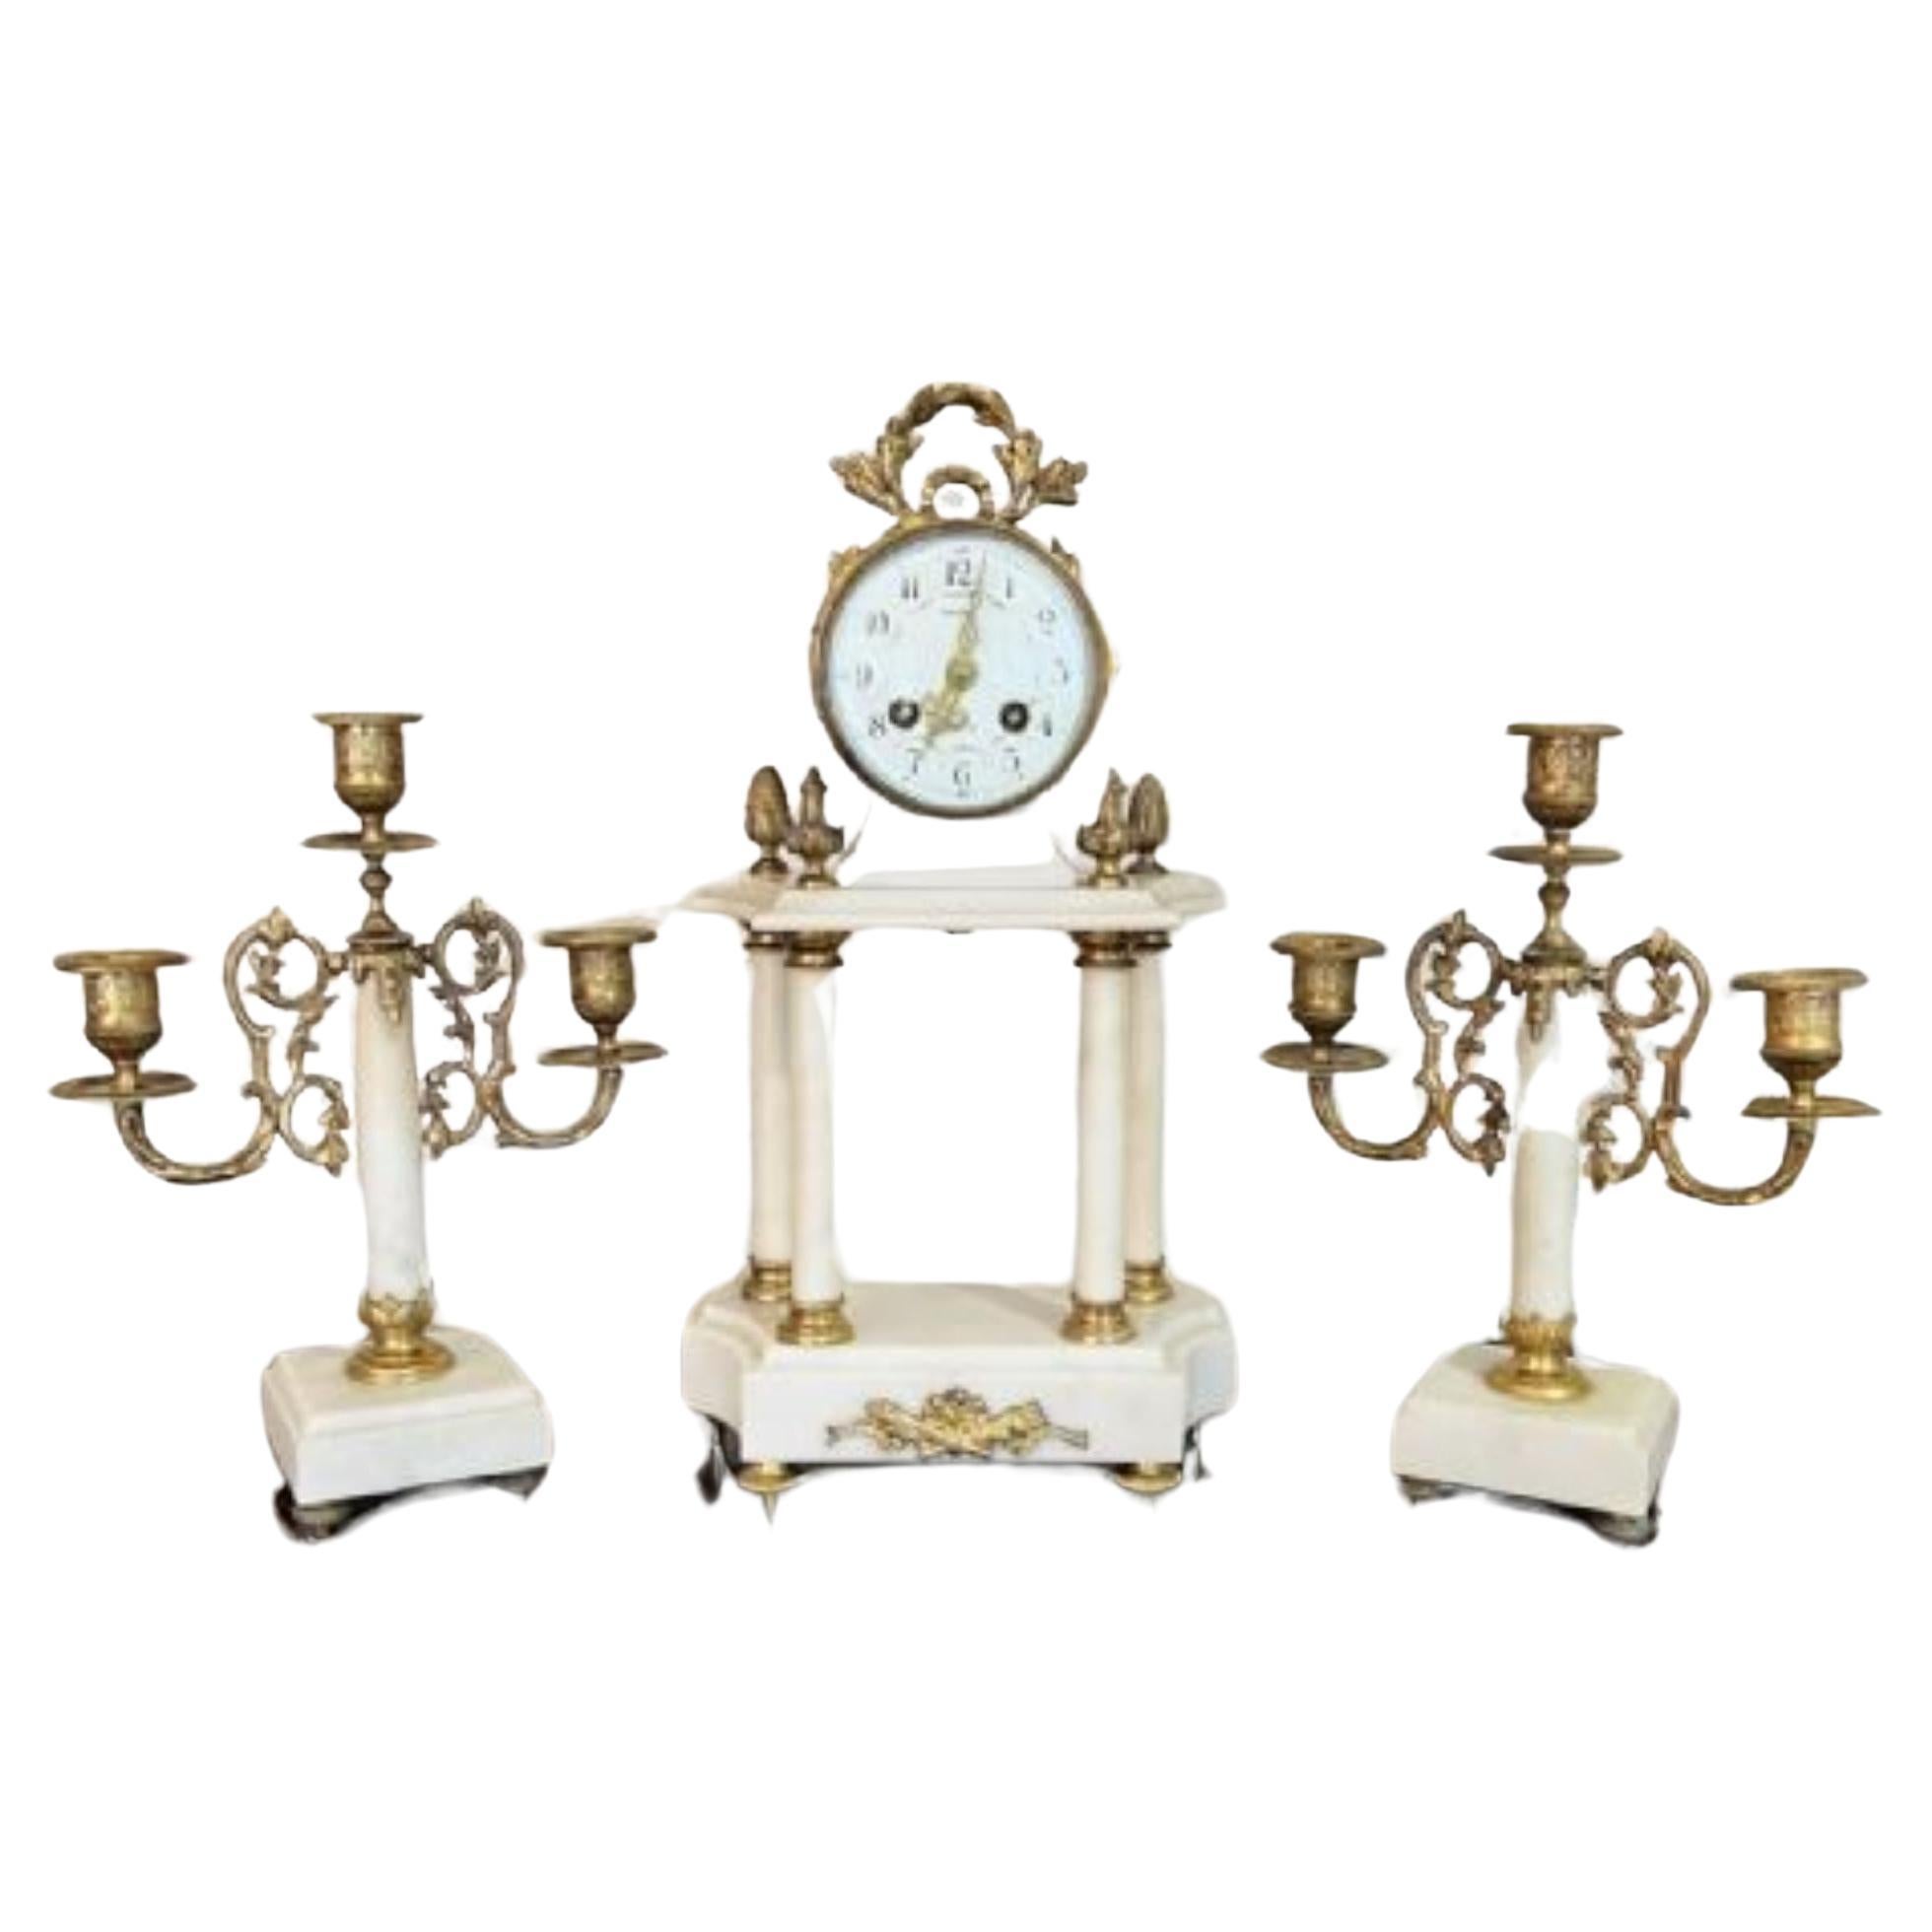 Quality antique Victorian clock garniture with a pair of candelabras  For Sale